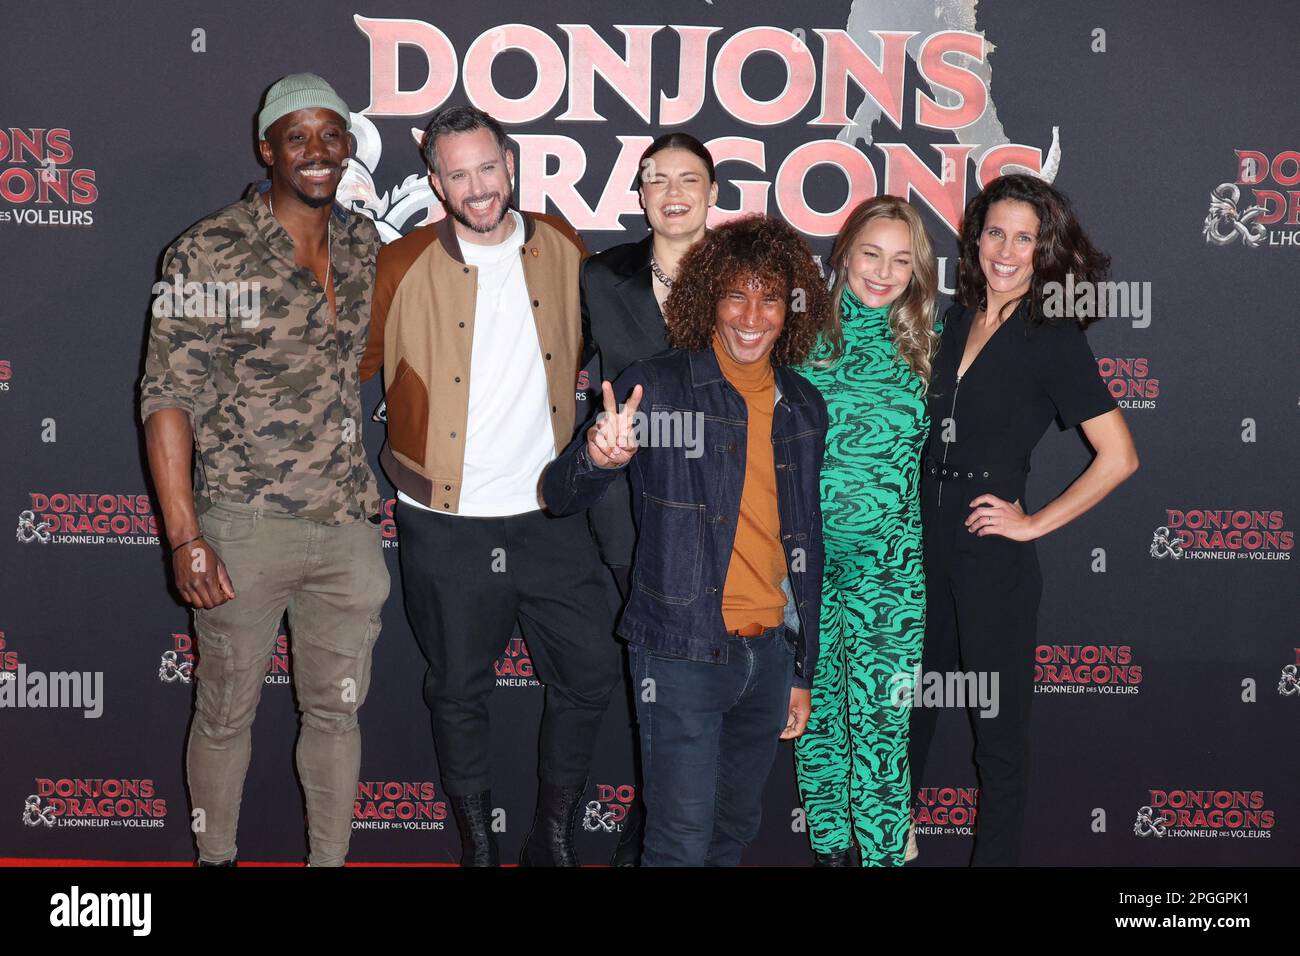 Paris, France. 22nd March, 2023. Olga Khokhlova, Cyril, Moussa, Cindy Poumeyrol, Clémence Castel and Laurent Maistret attends Dungeons & Dragons Premiere held at Grand Rex on March 22, 2023 in Paris, France. Photo by Jerome Dominé/ABACAPRESS.COM Credit: Abaca Press/Alamy Live News Stock Photo